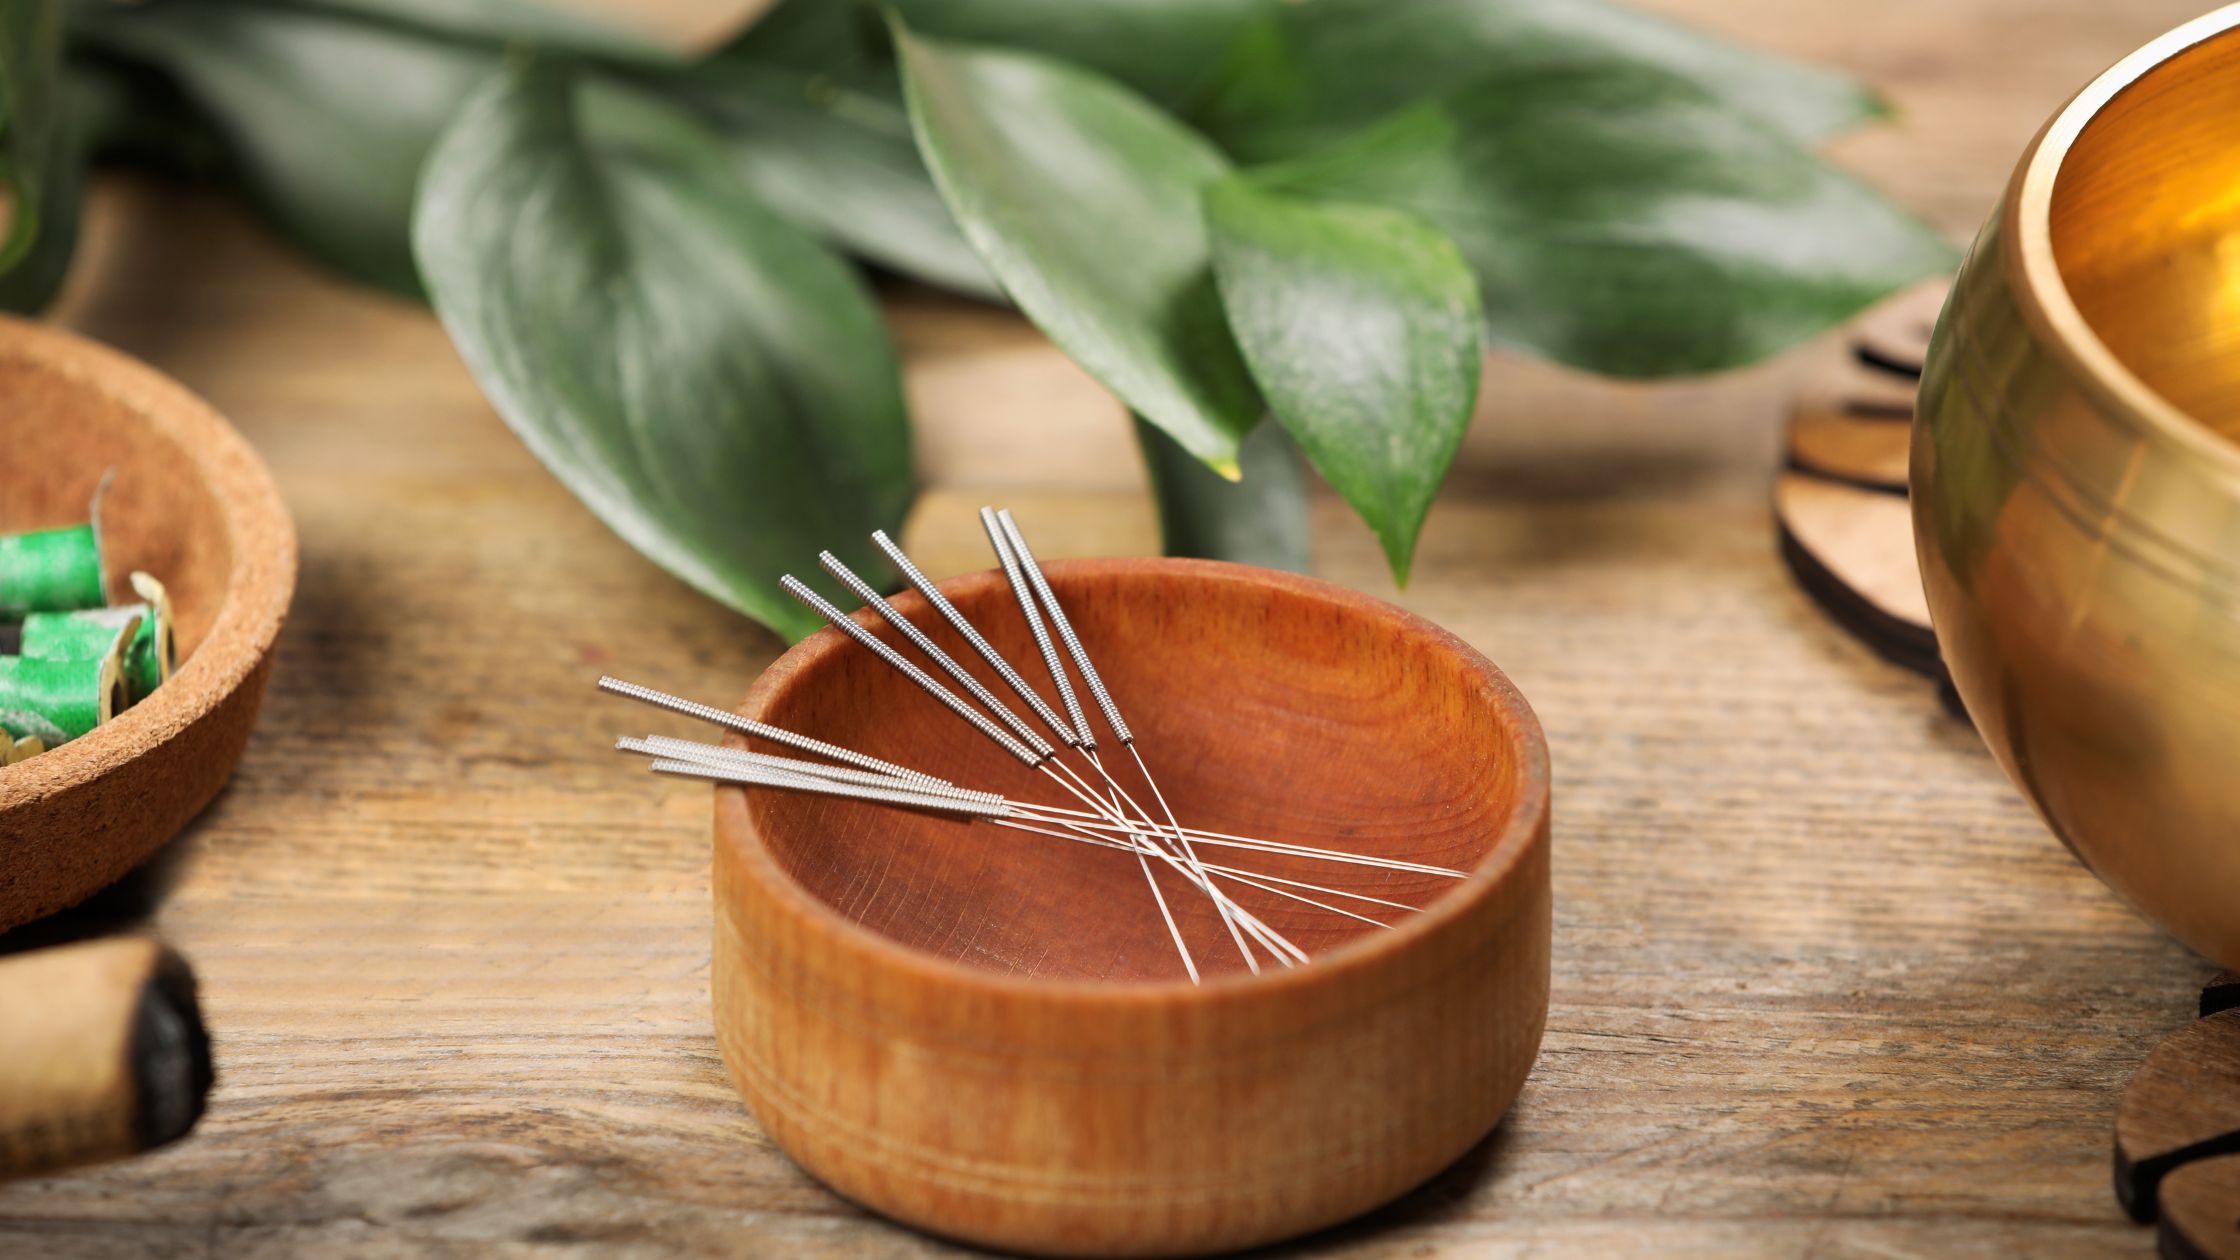 acupuncture needles - what are the benefits of acupuncture